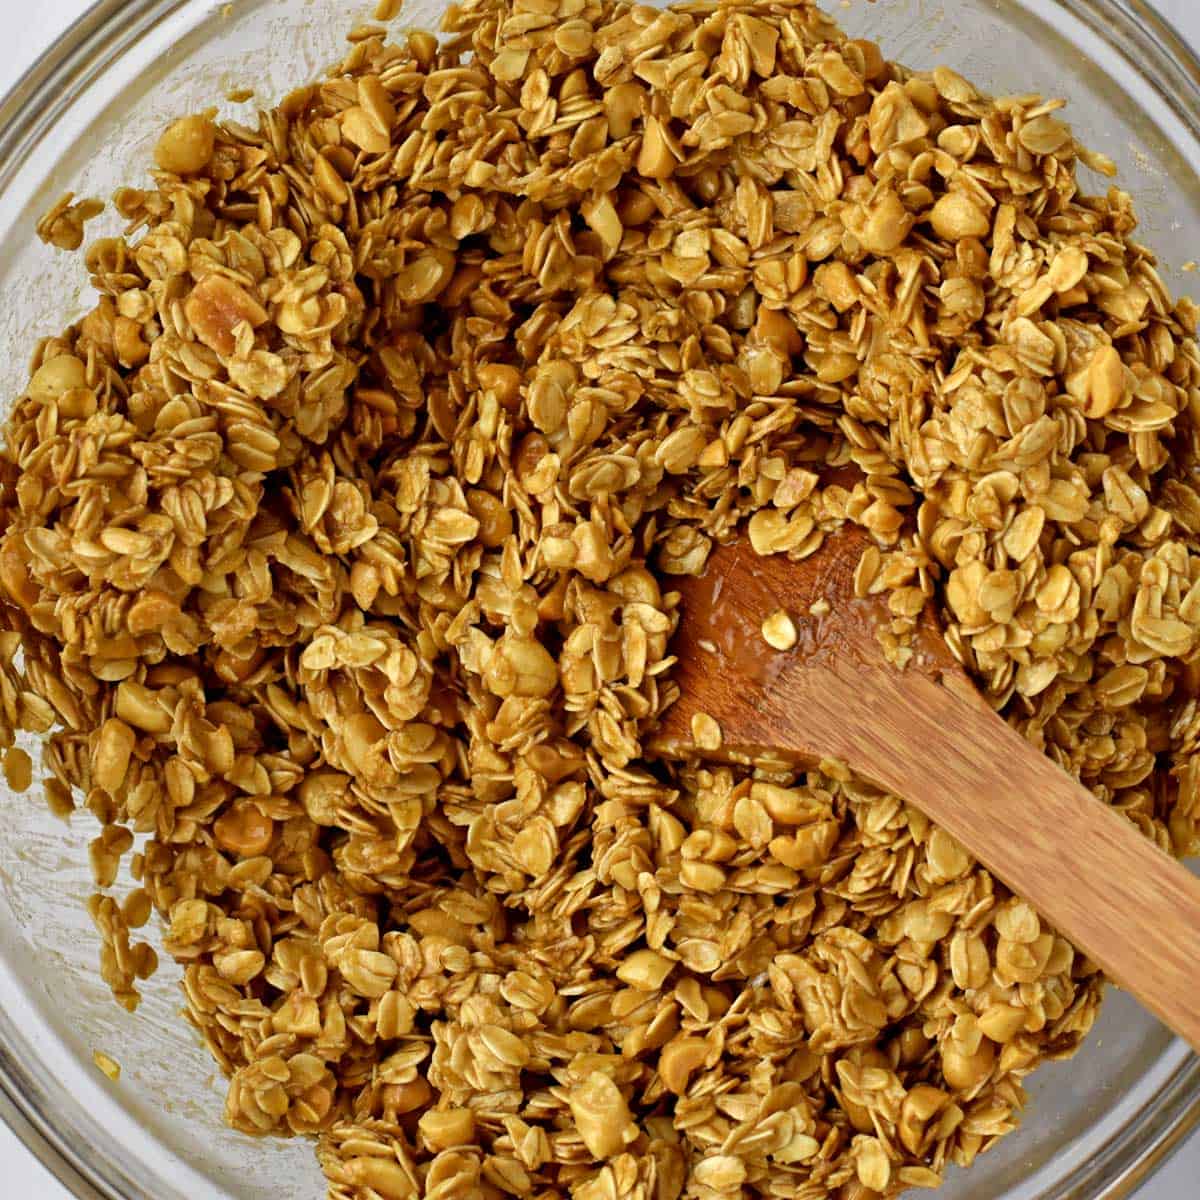 Unbaked peanut butter granola and wooden spoon in glass mixing bowl.